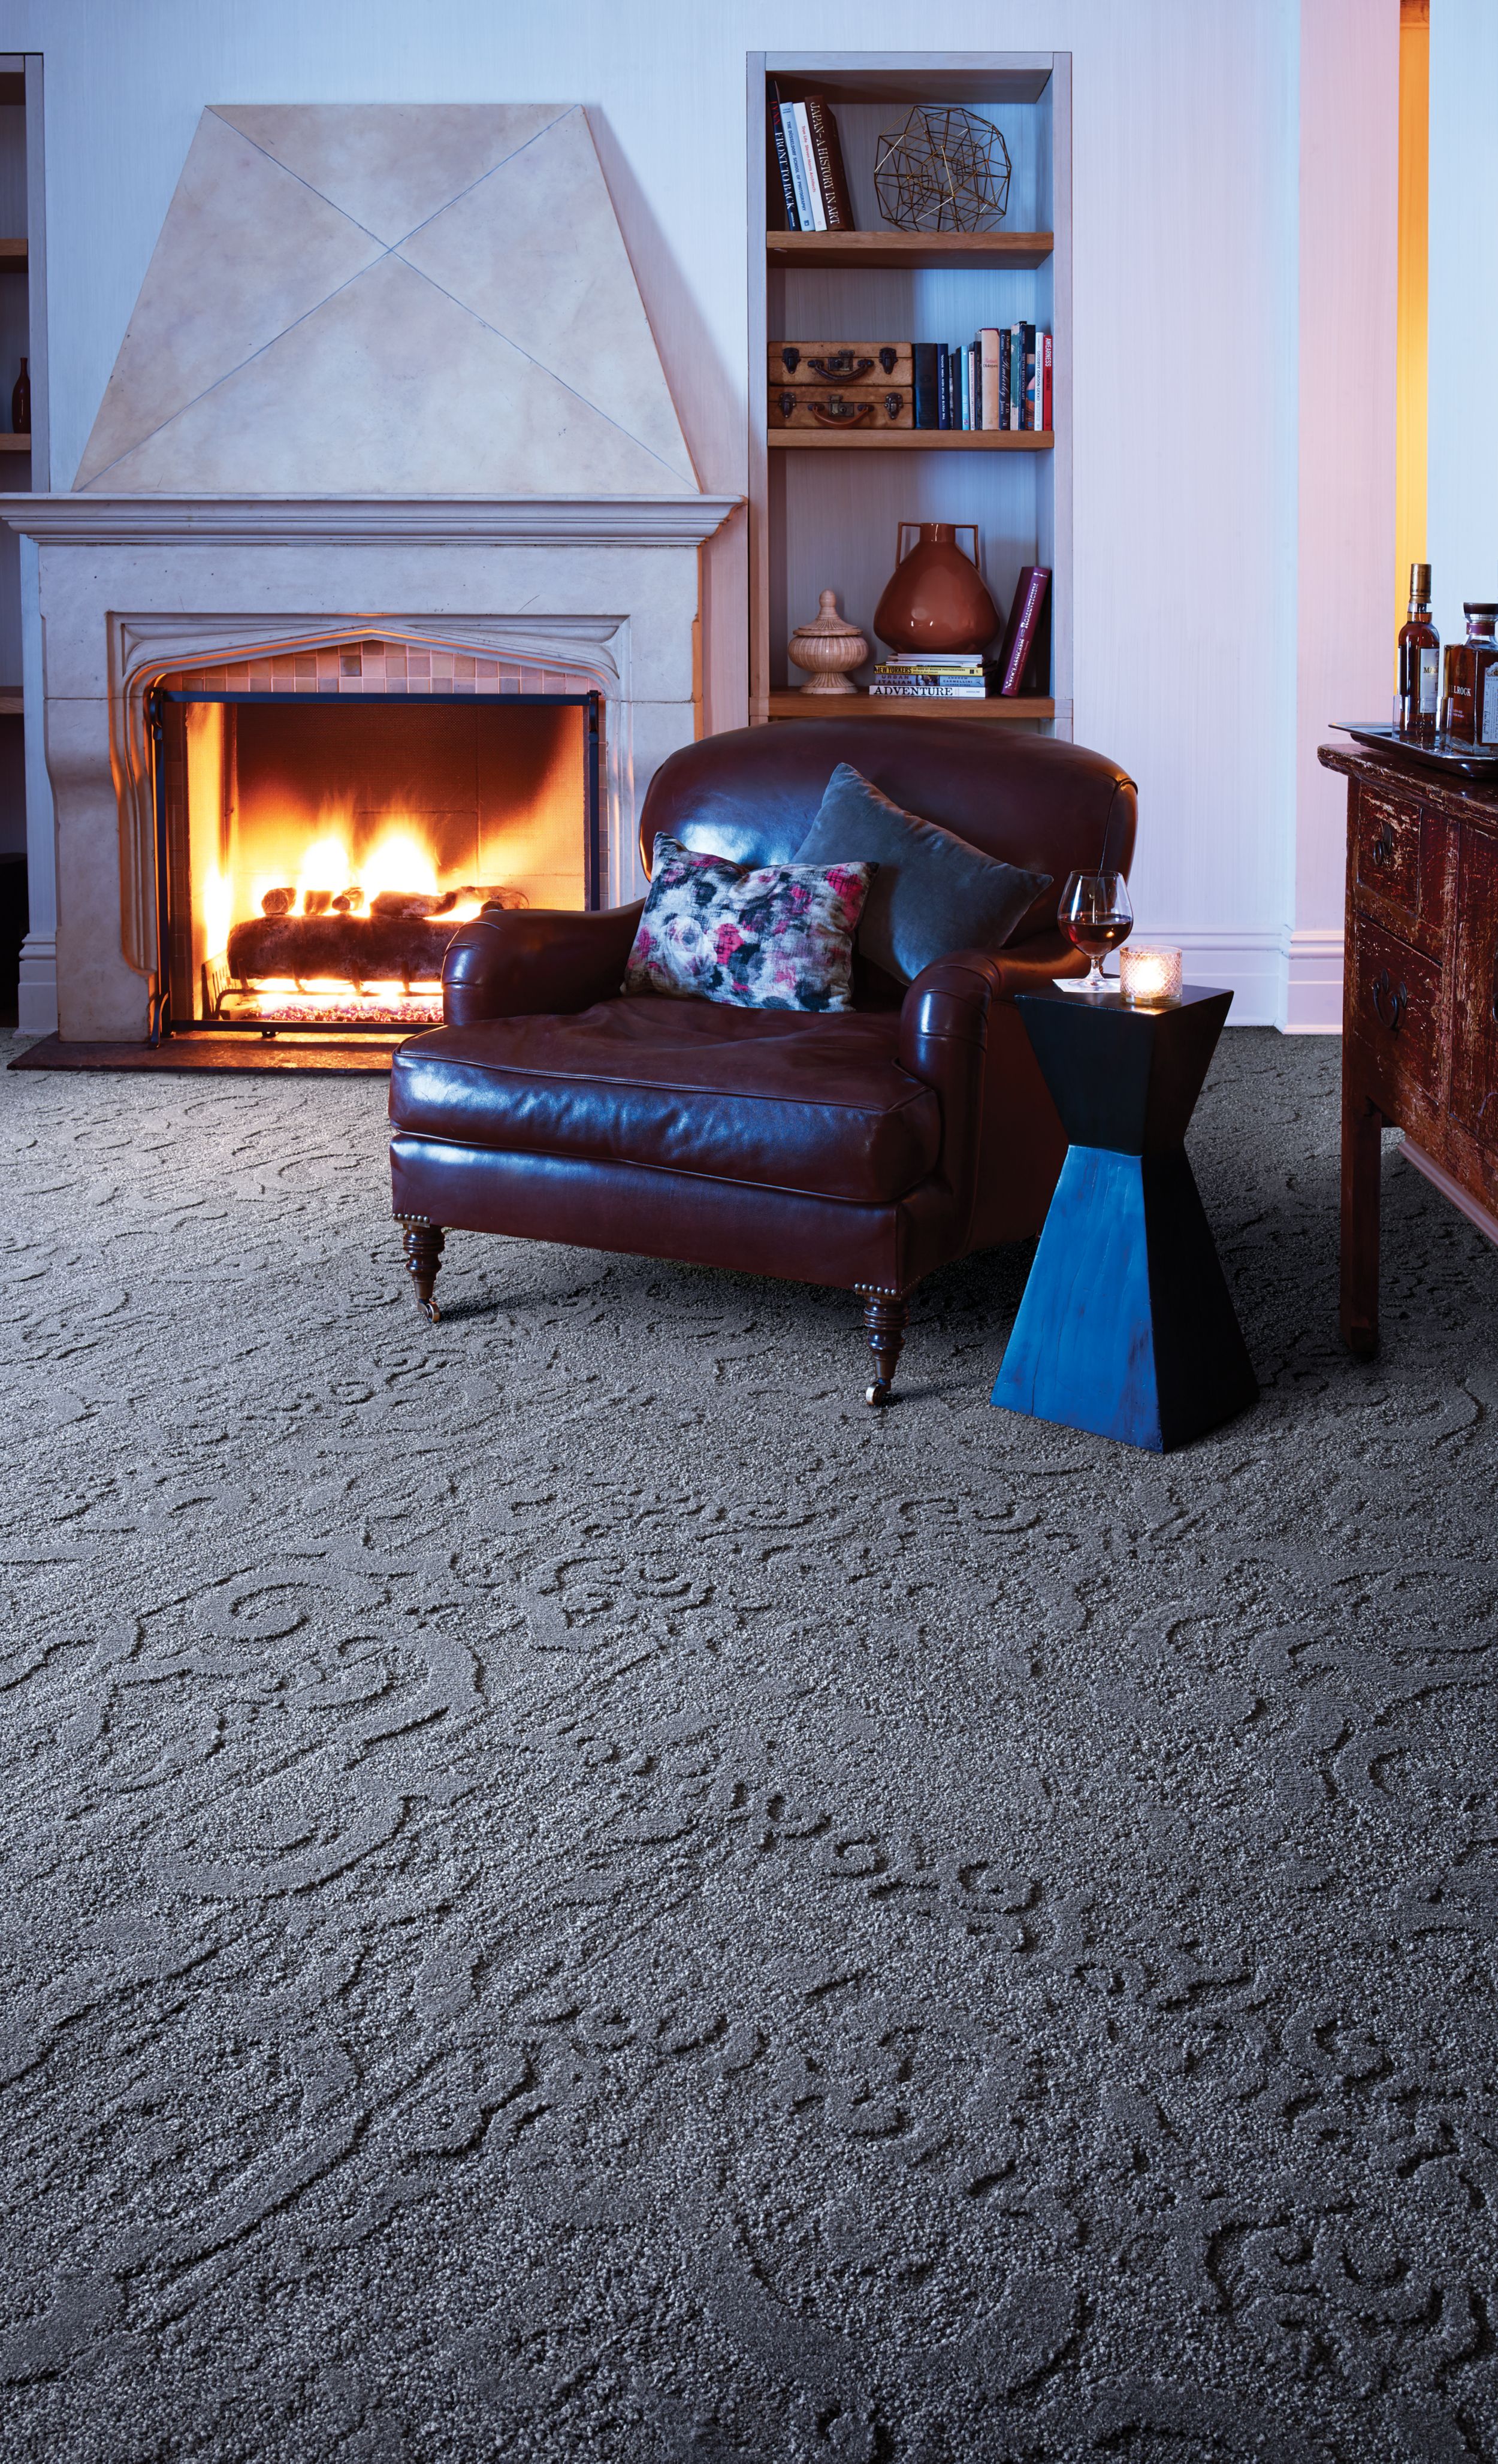 Interface NS230 carpet tile in room with fireplace and chair imagen número 1